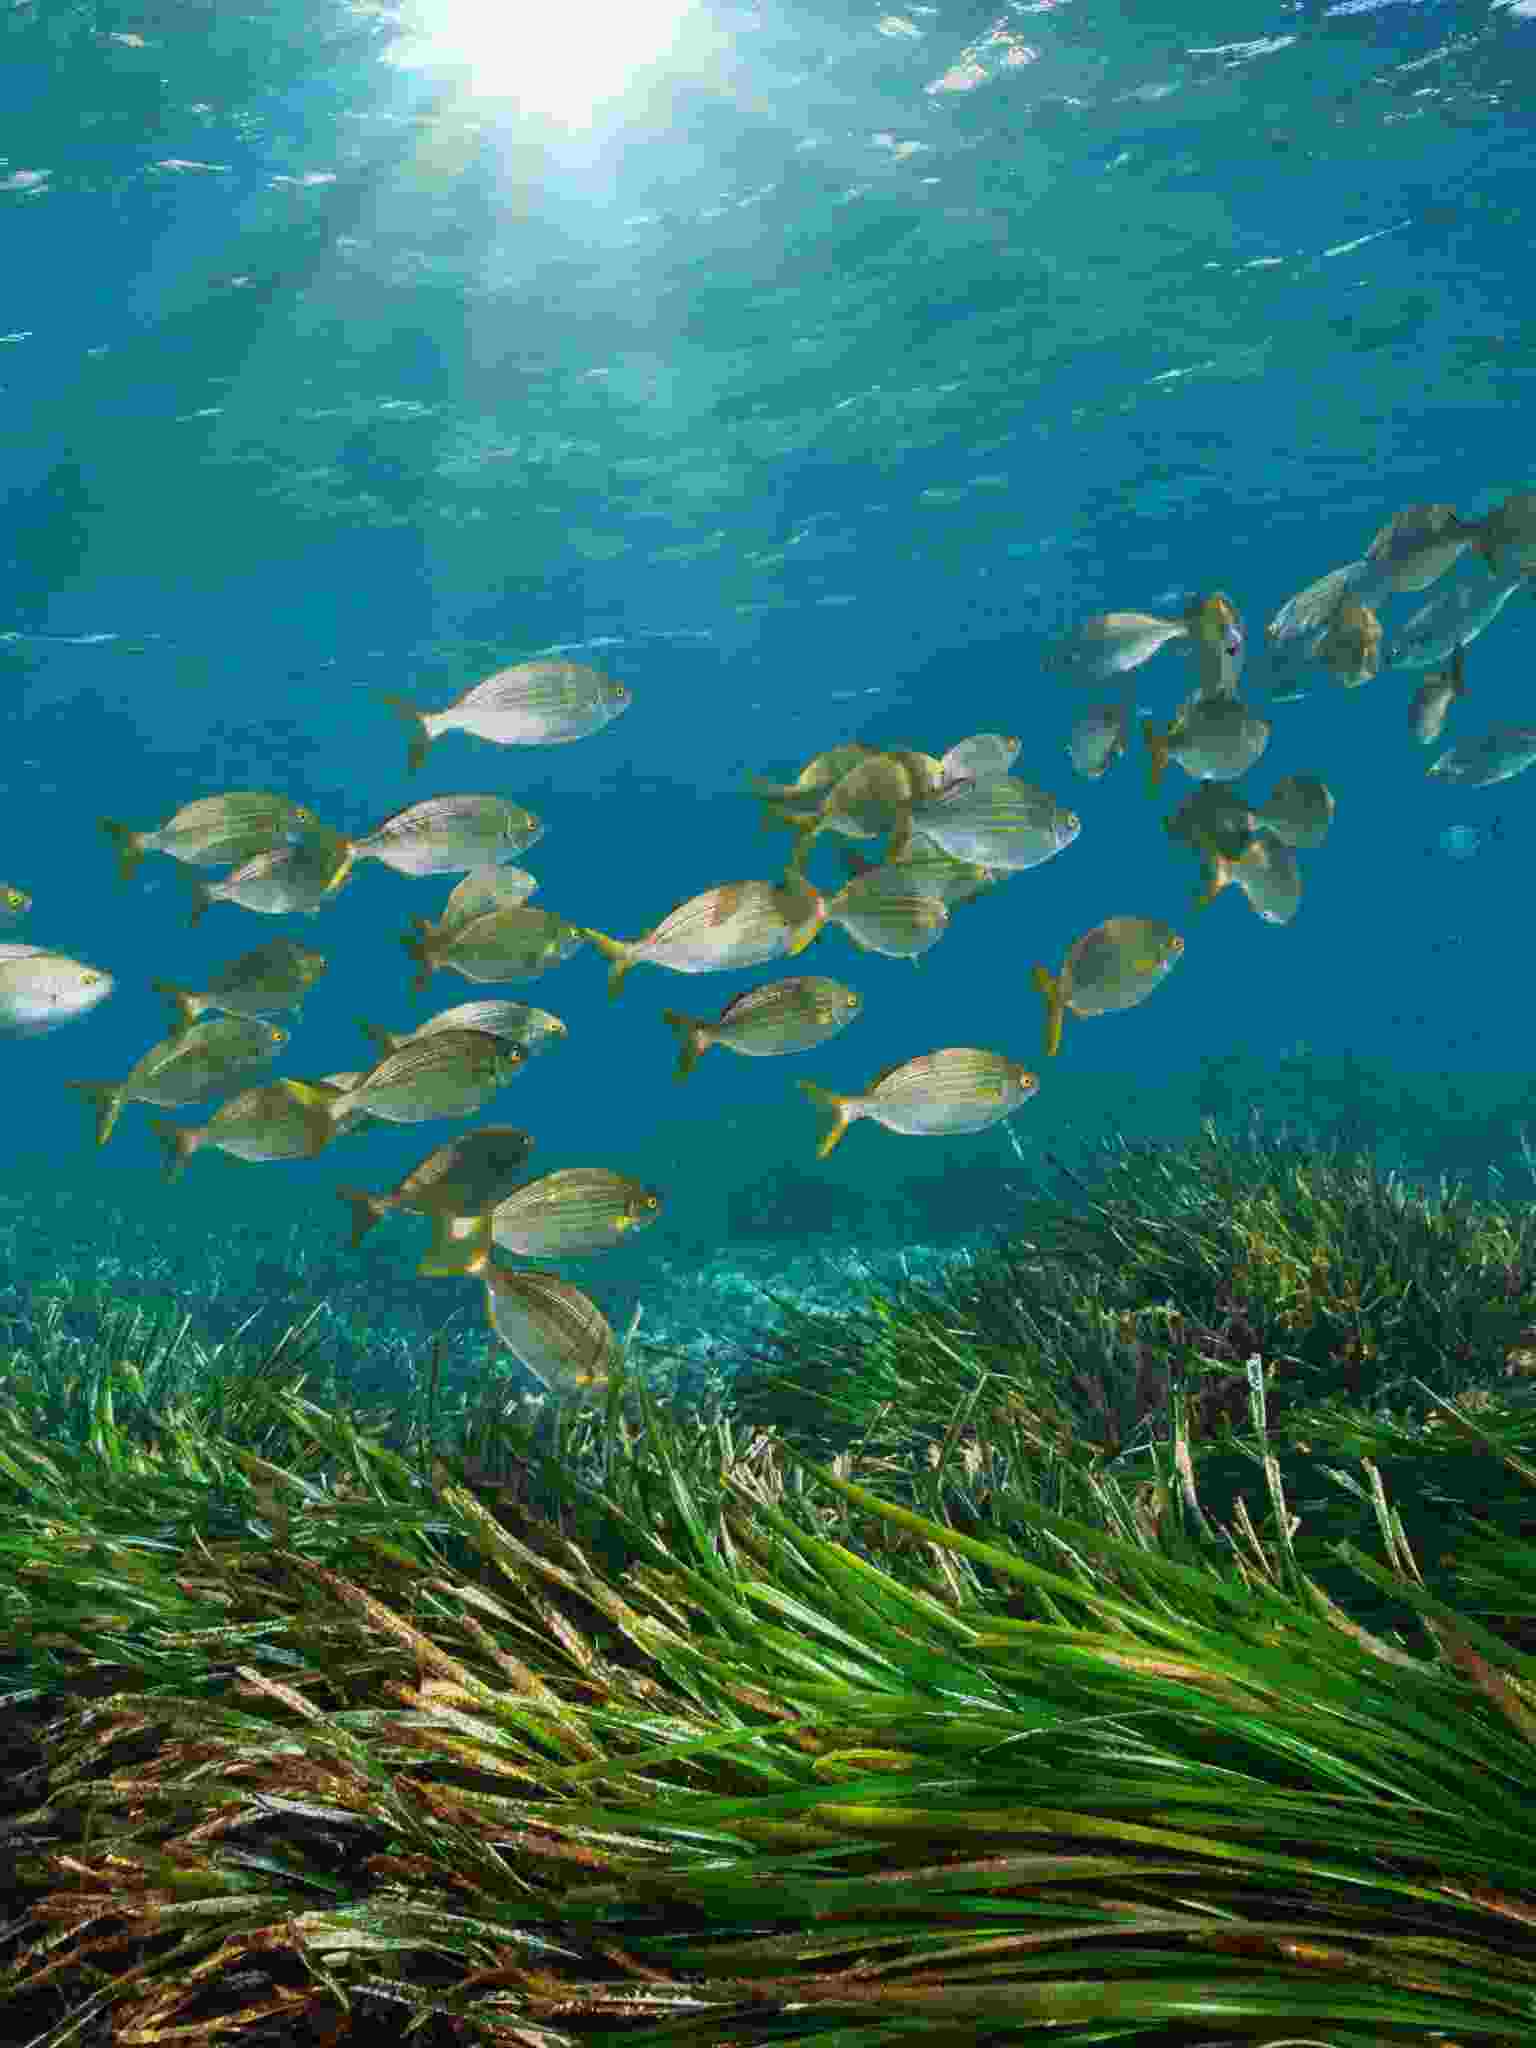 Fish and seagrass image